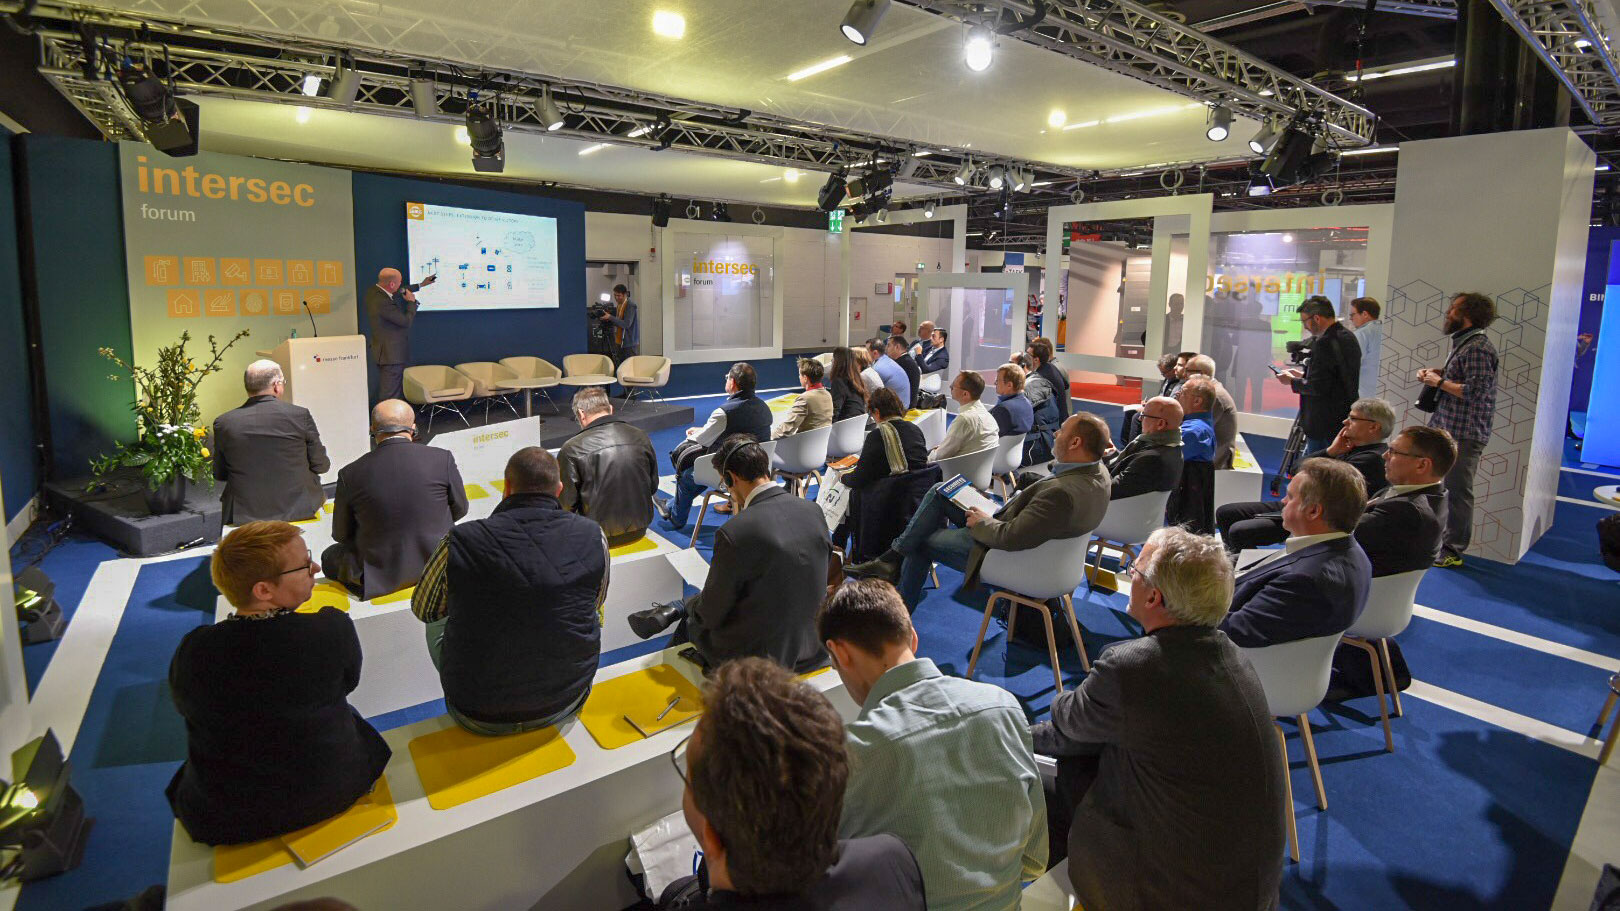 4th Intersec Forum: shares know-how on connected security technology in the field of  building-services technology (Source: Messe Frankfurt / Sandra Gätke)